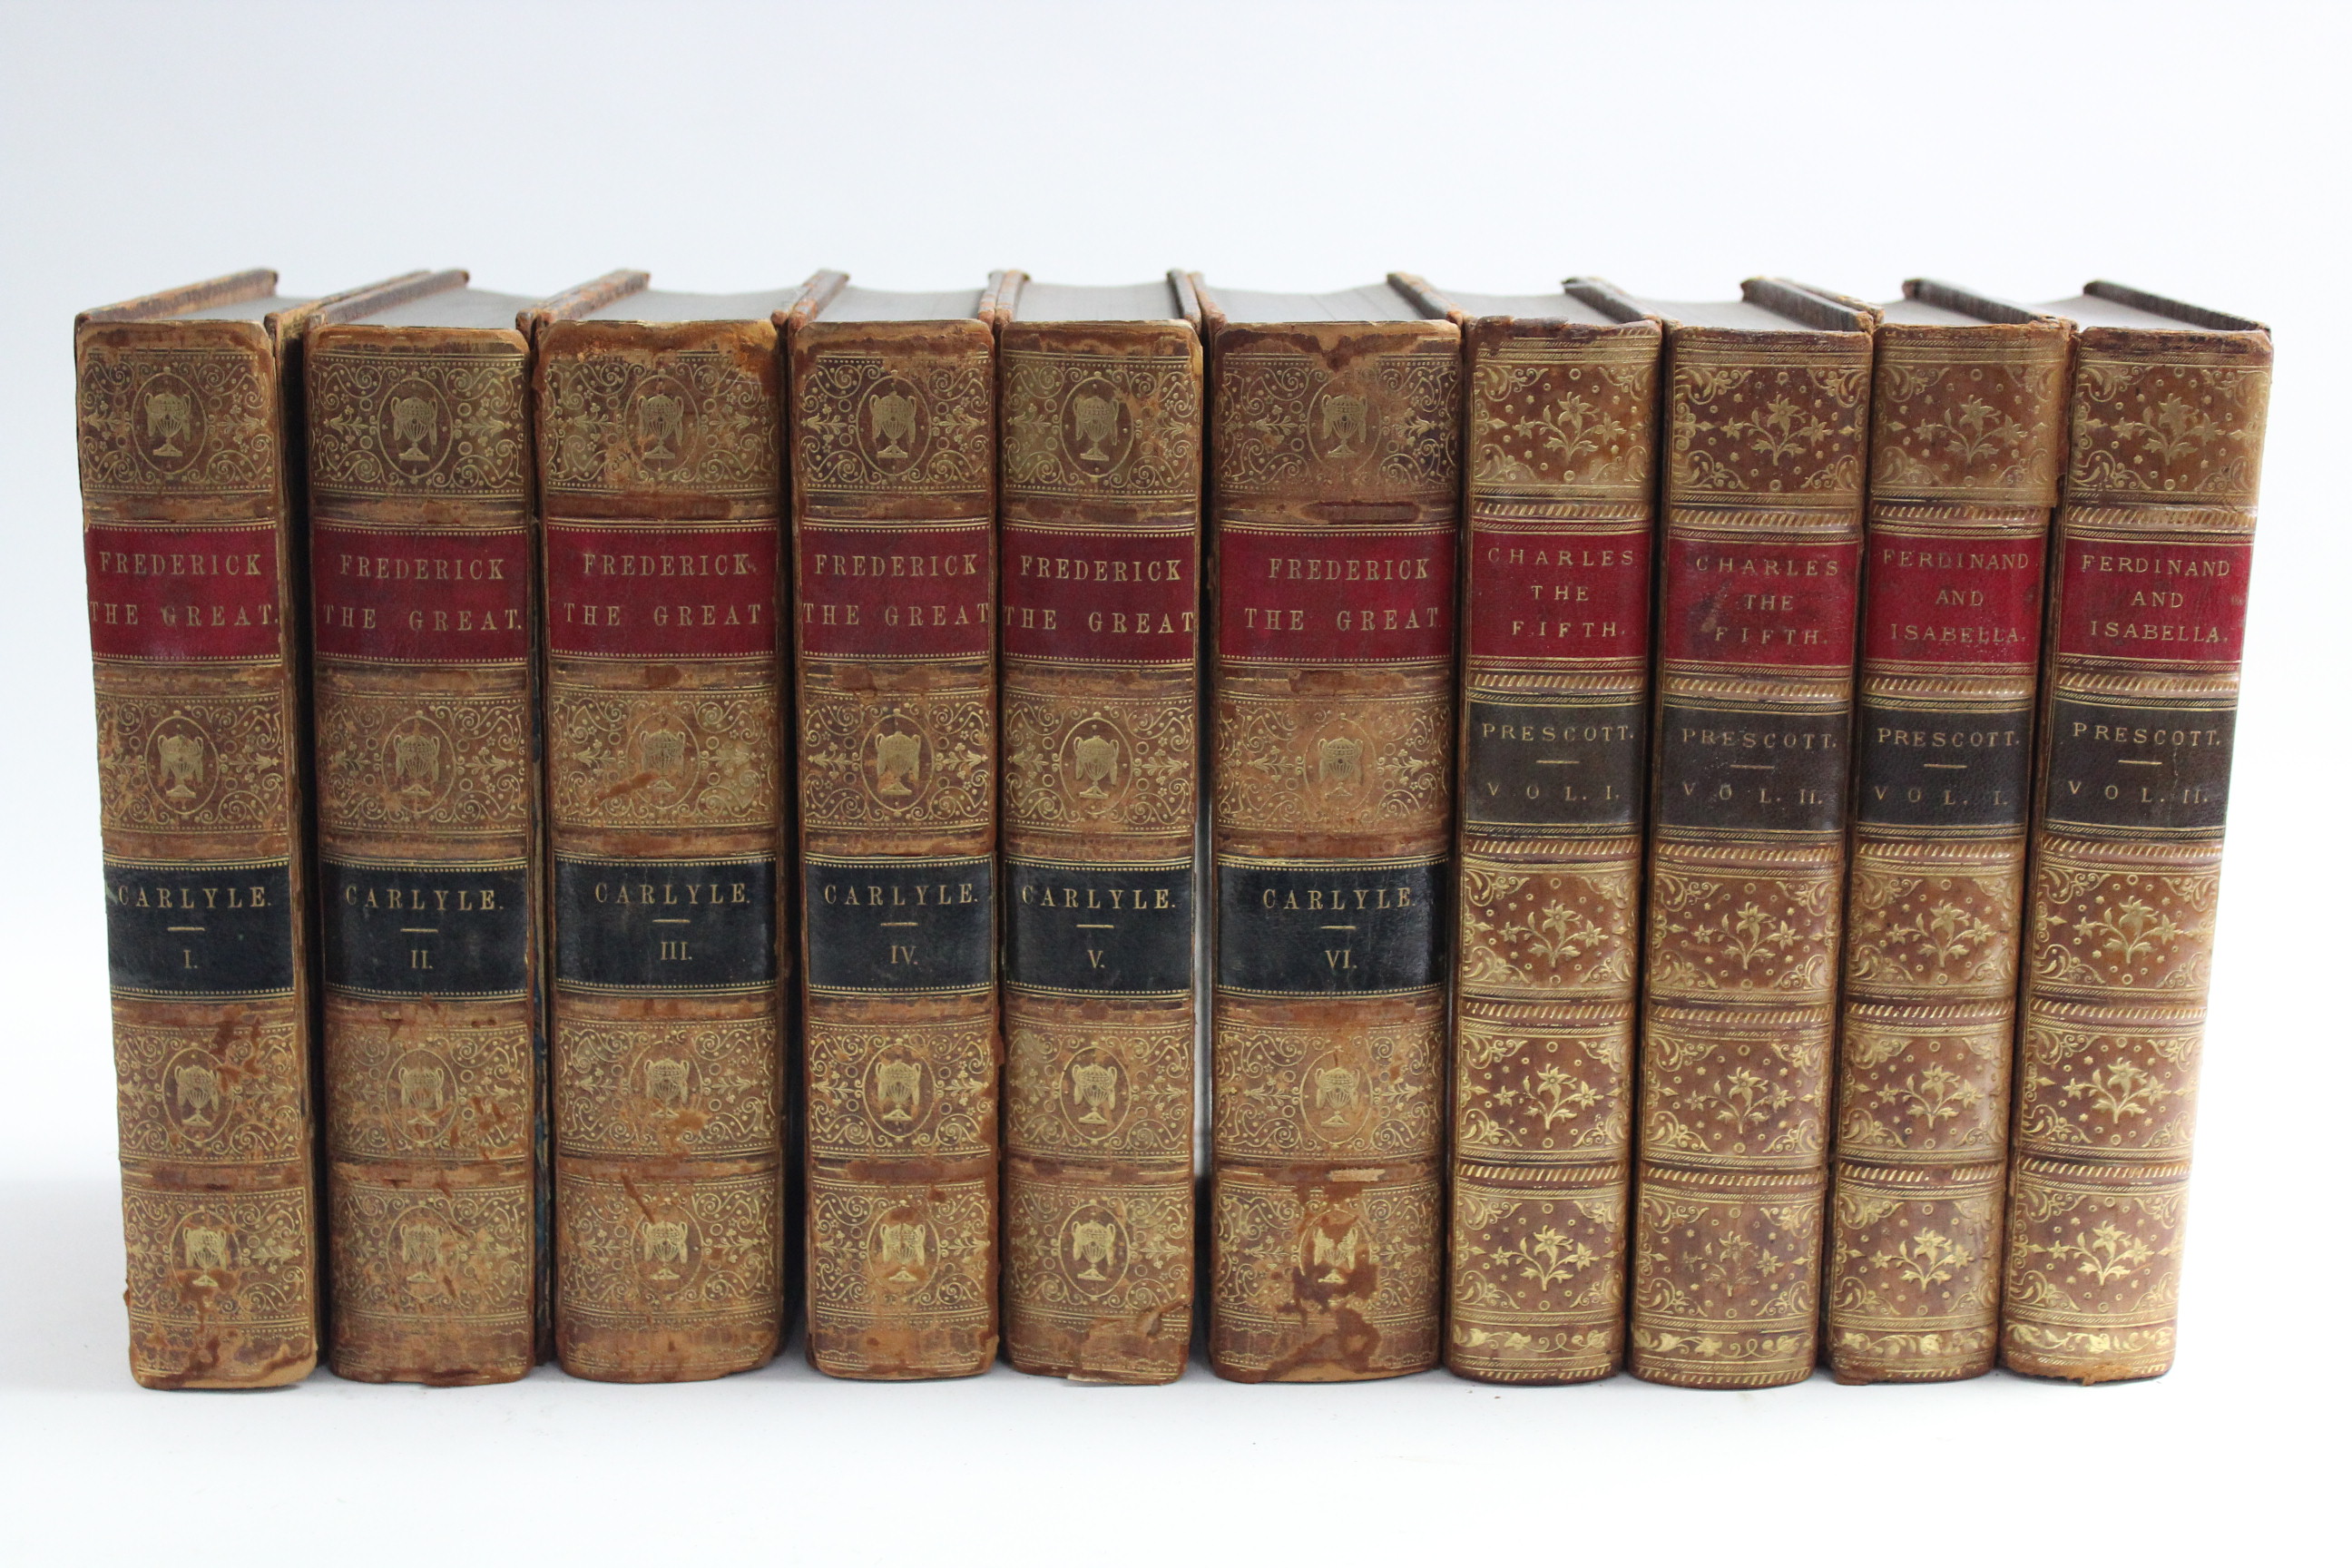 A set of six mid-19th century leather-bound volumes “Frederick The Great” by Thomas Carlyle, two